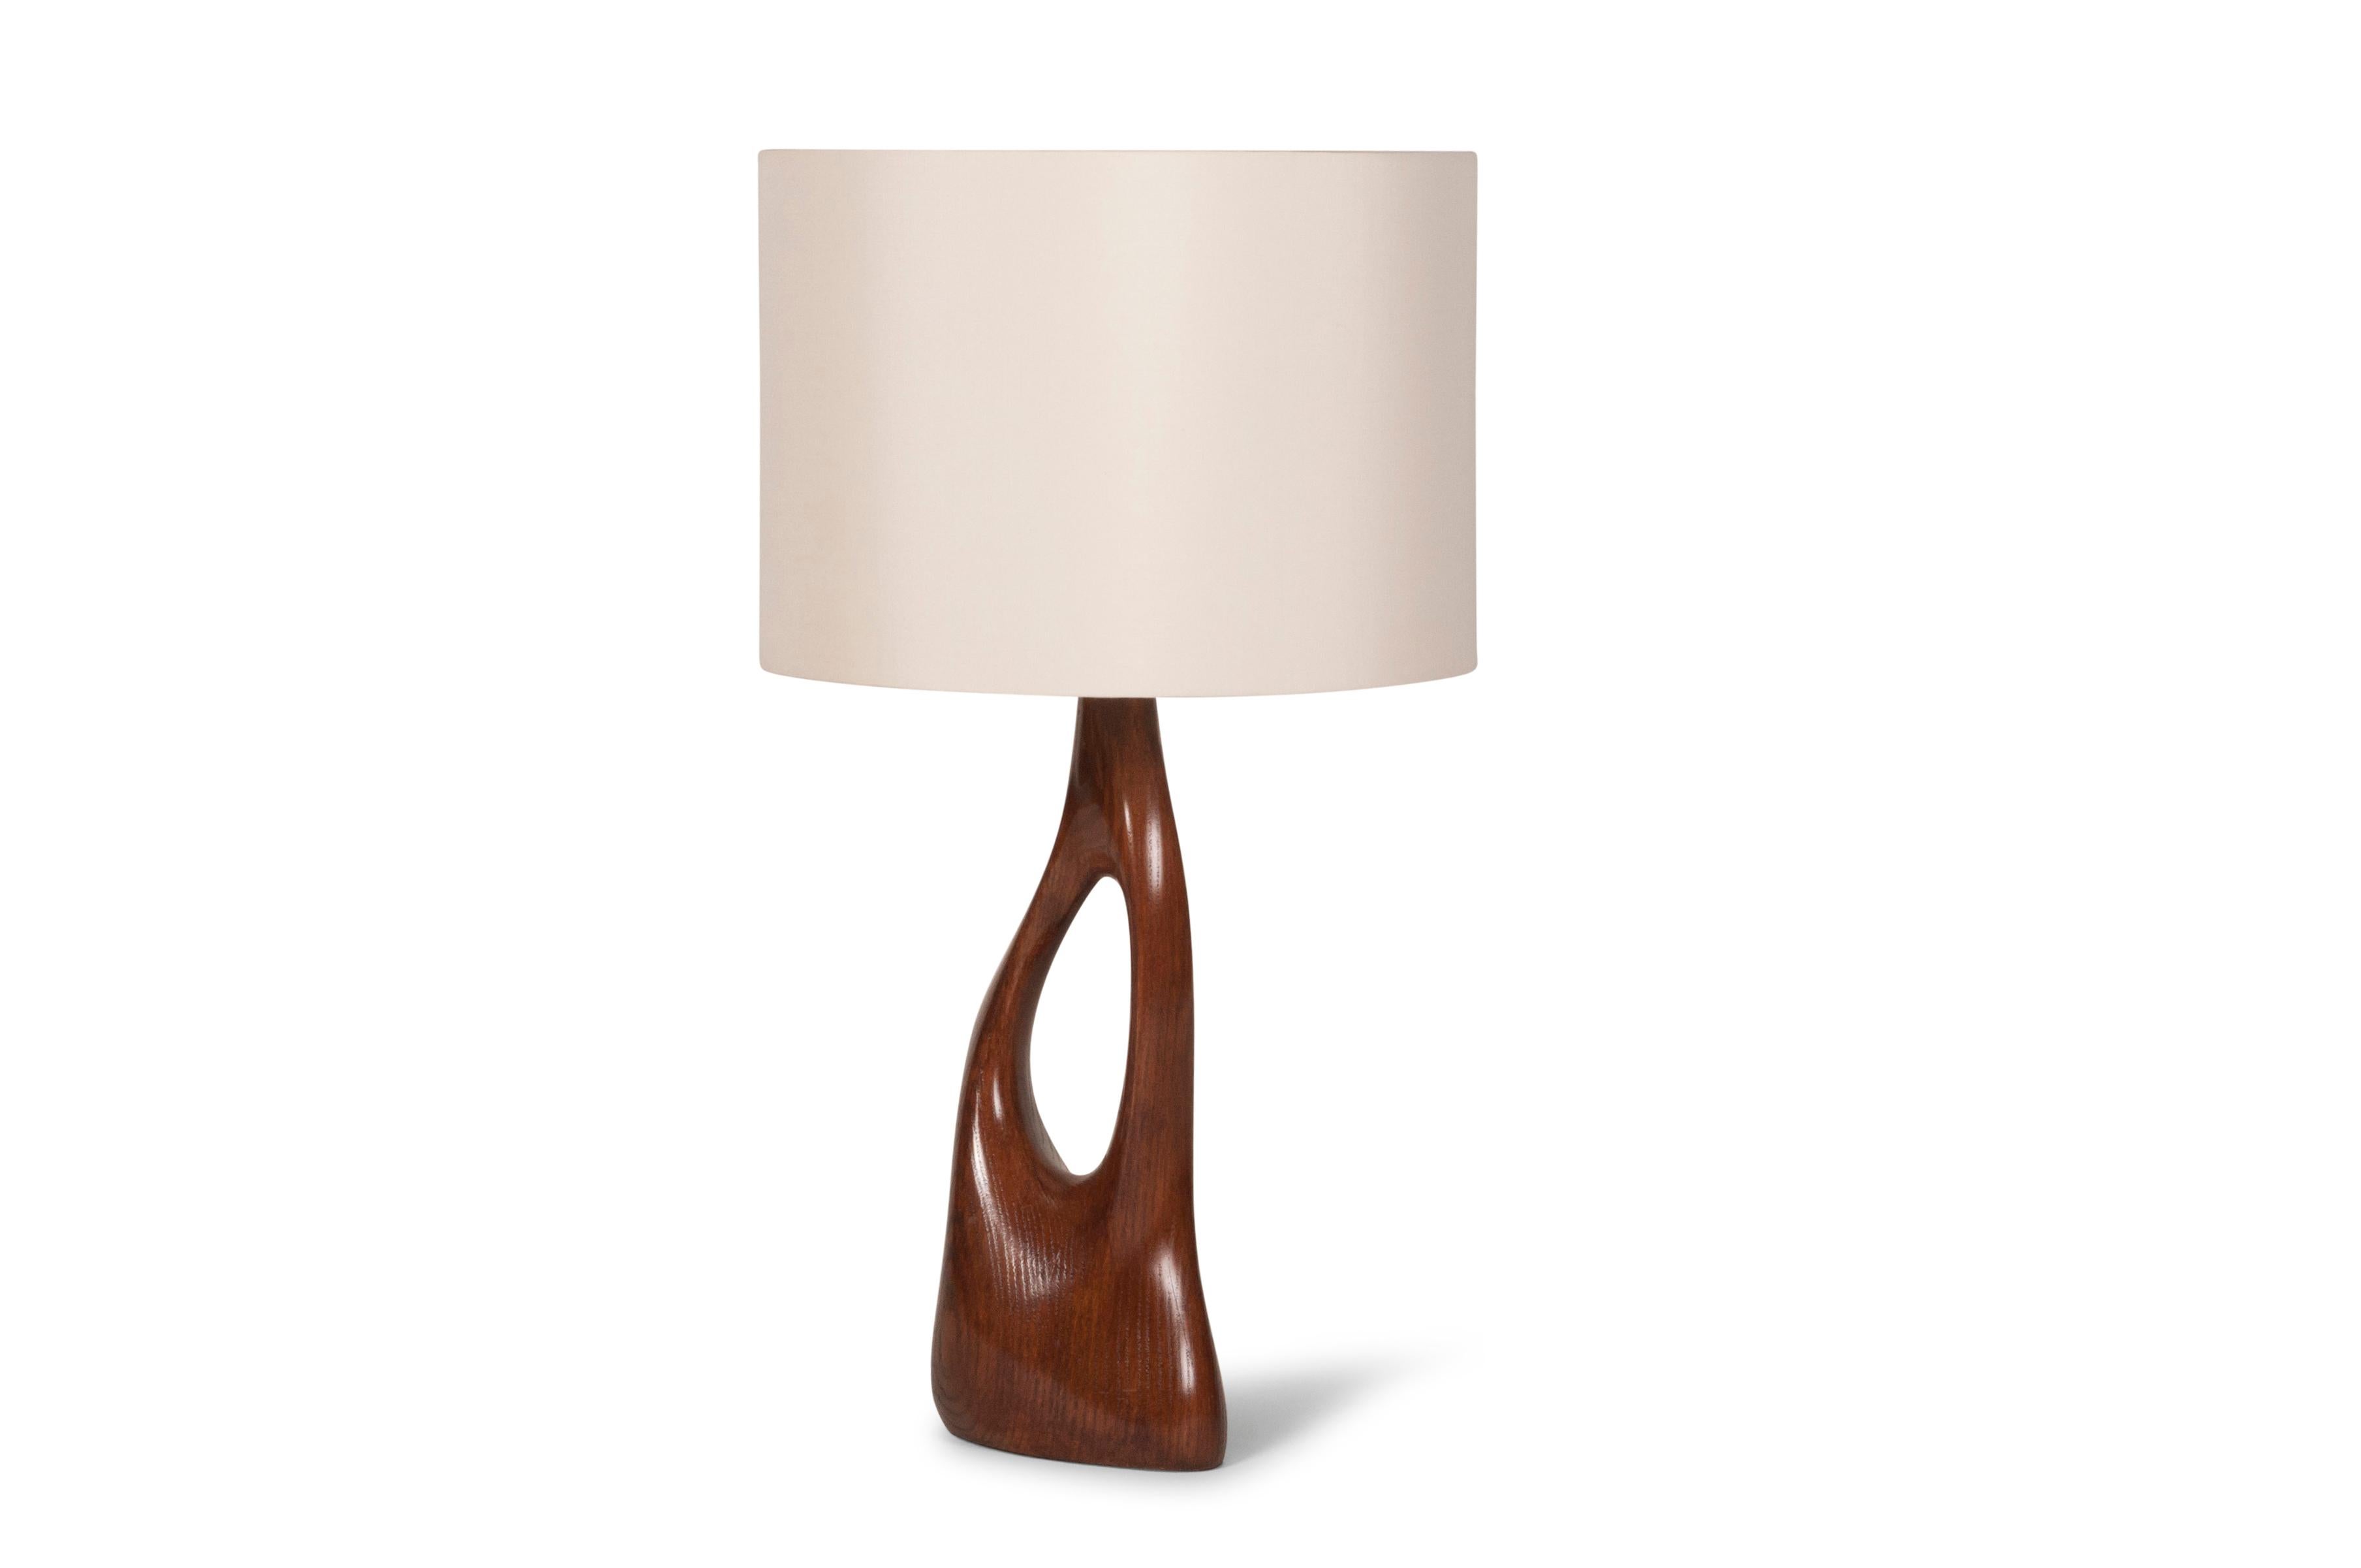 Sculptural table lamp made from ashwood with walnut stained
Dimension base: 16